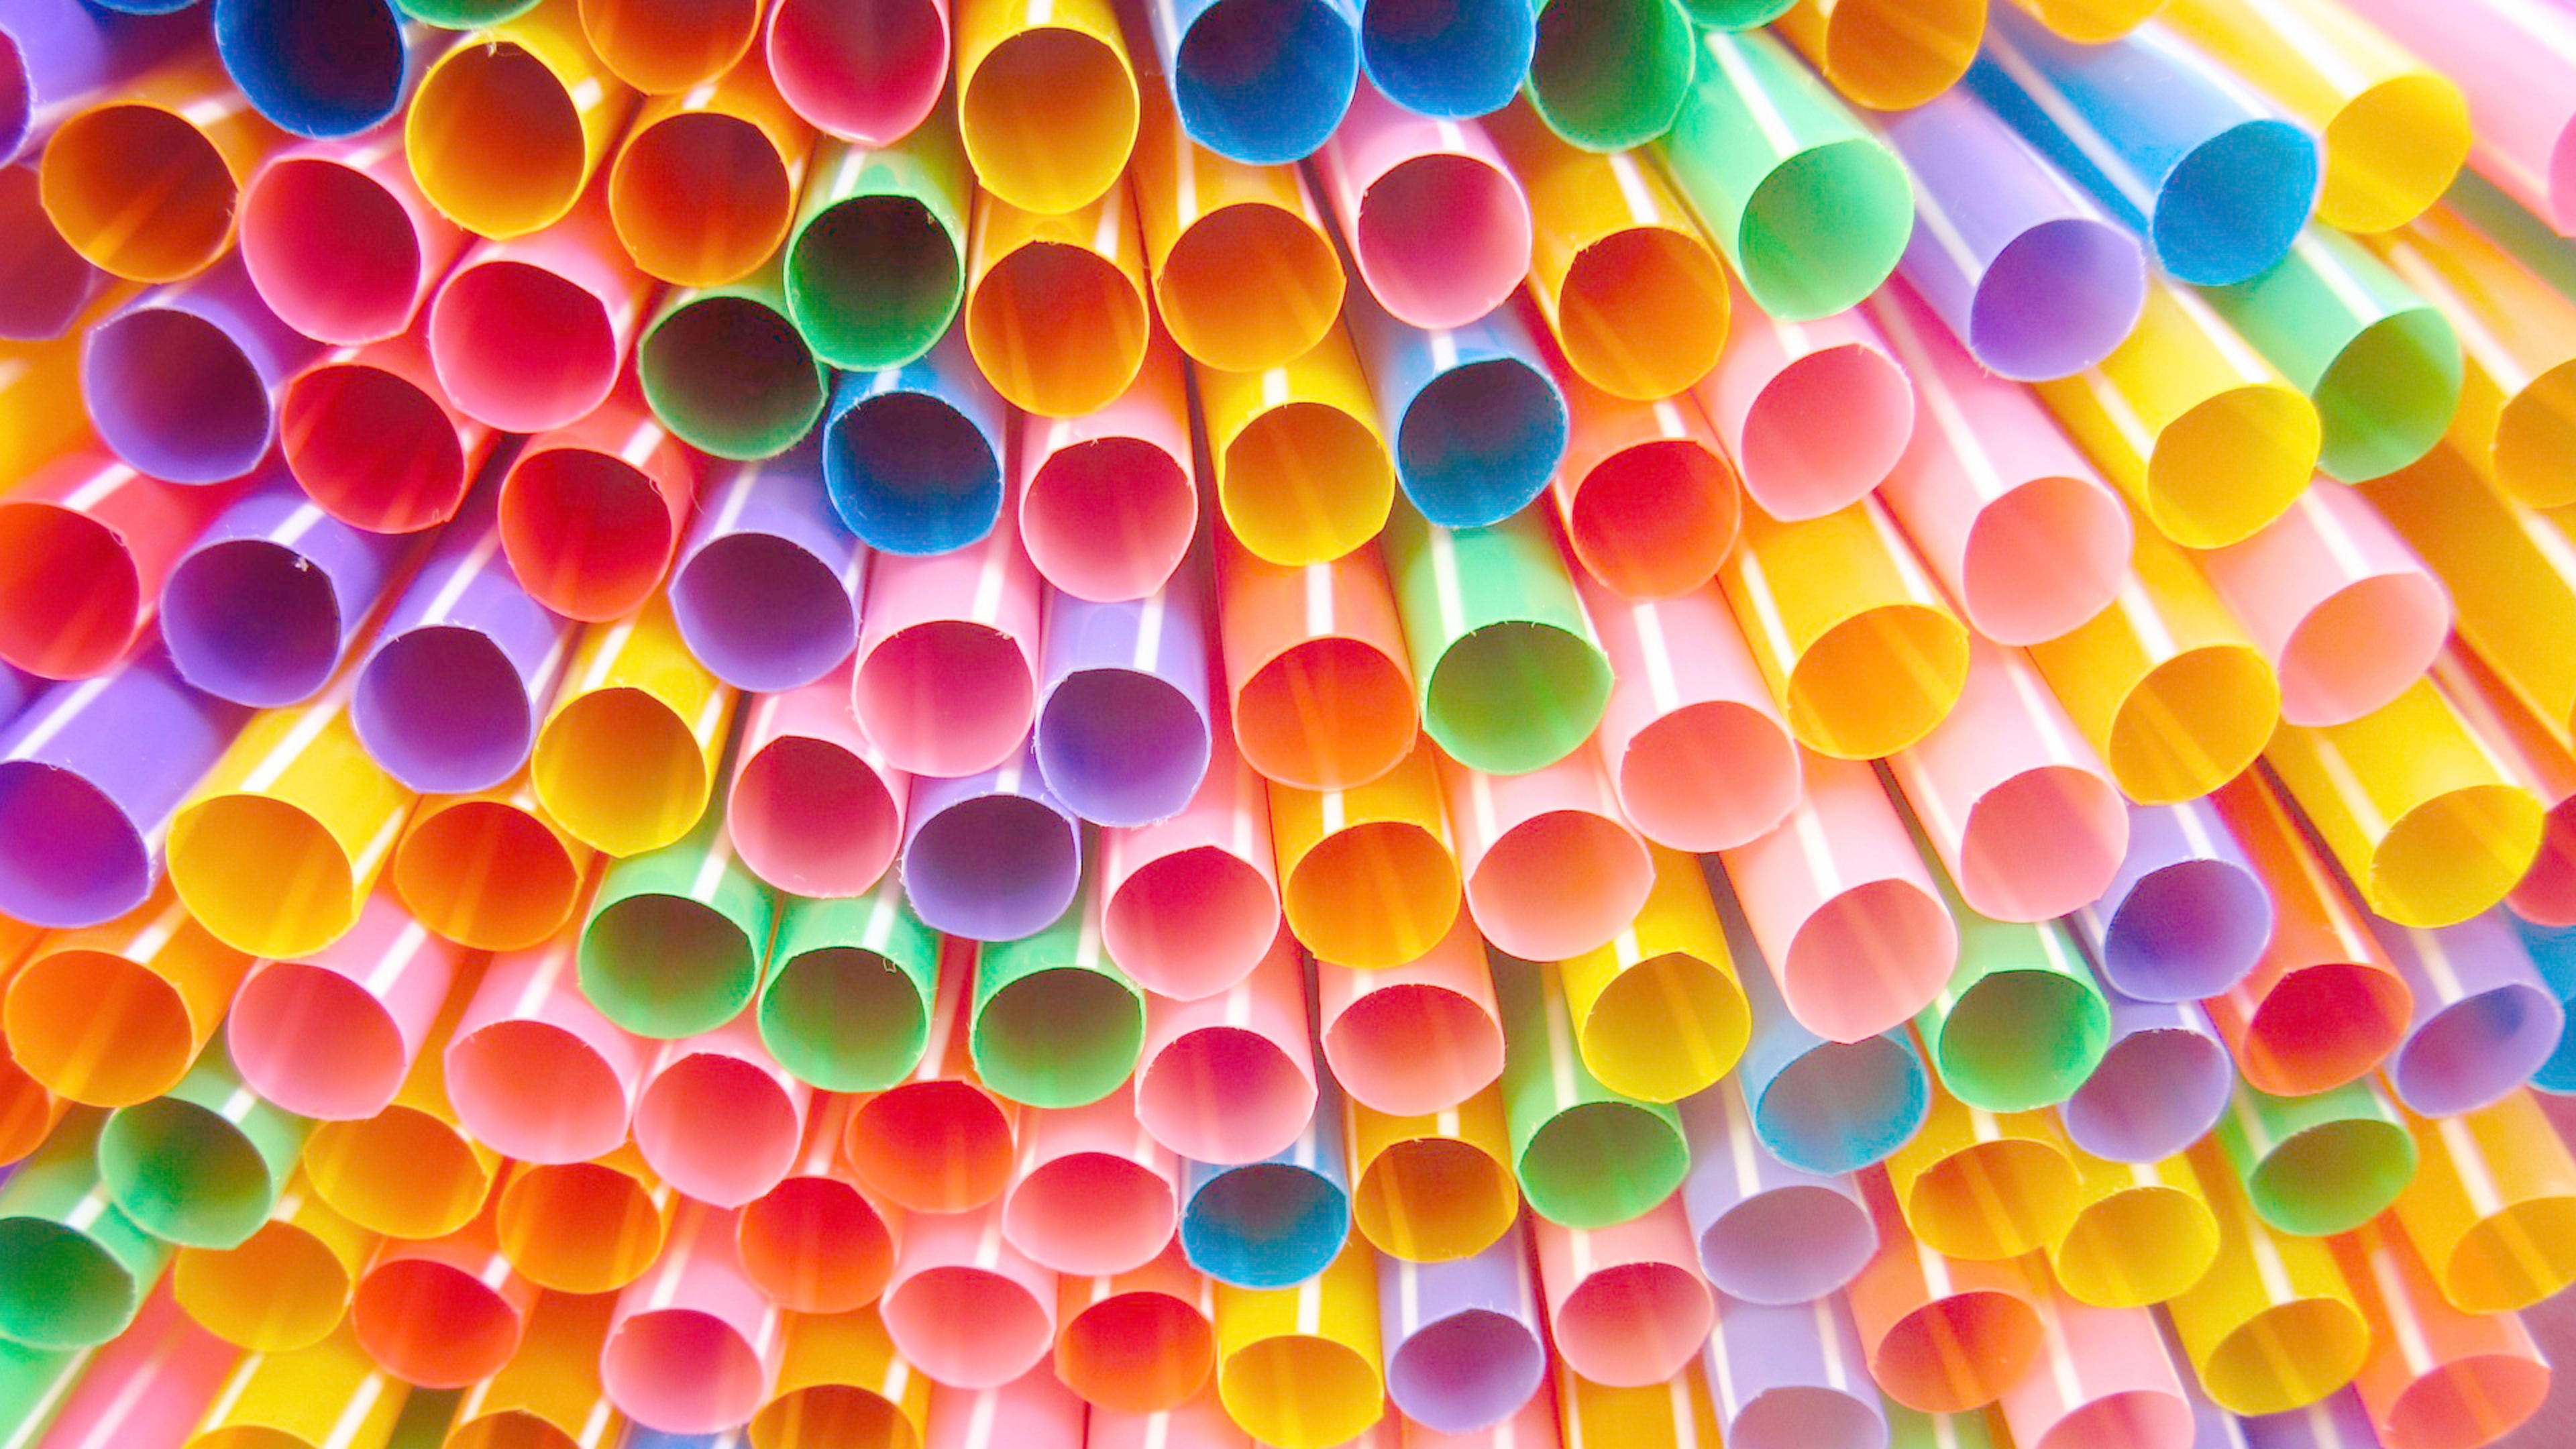 Here are the U.S. cities that have banned plastic straws so far